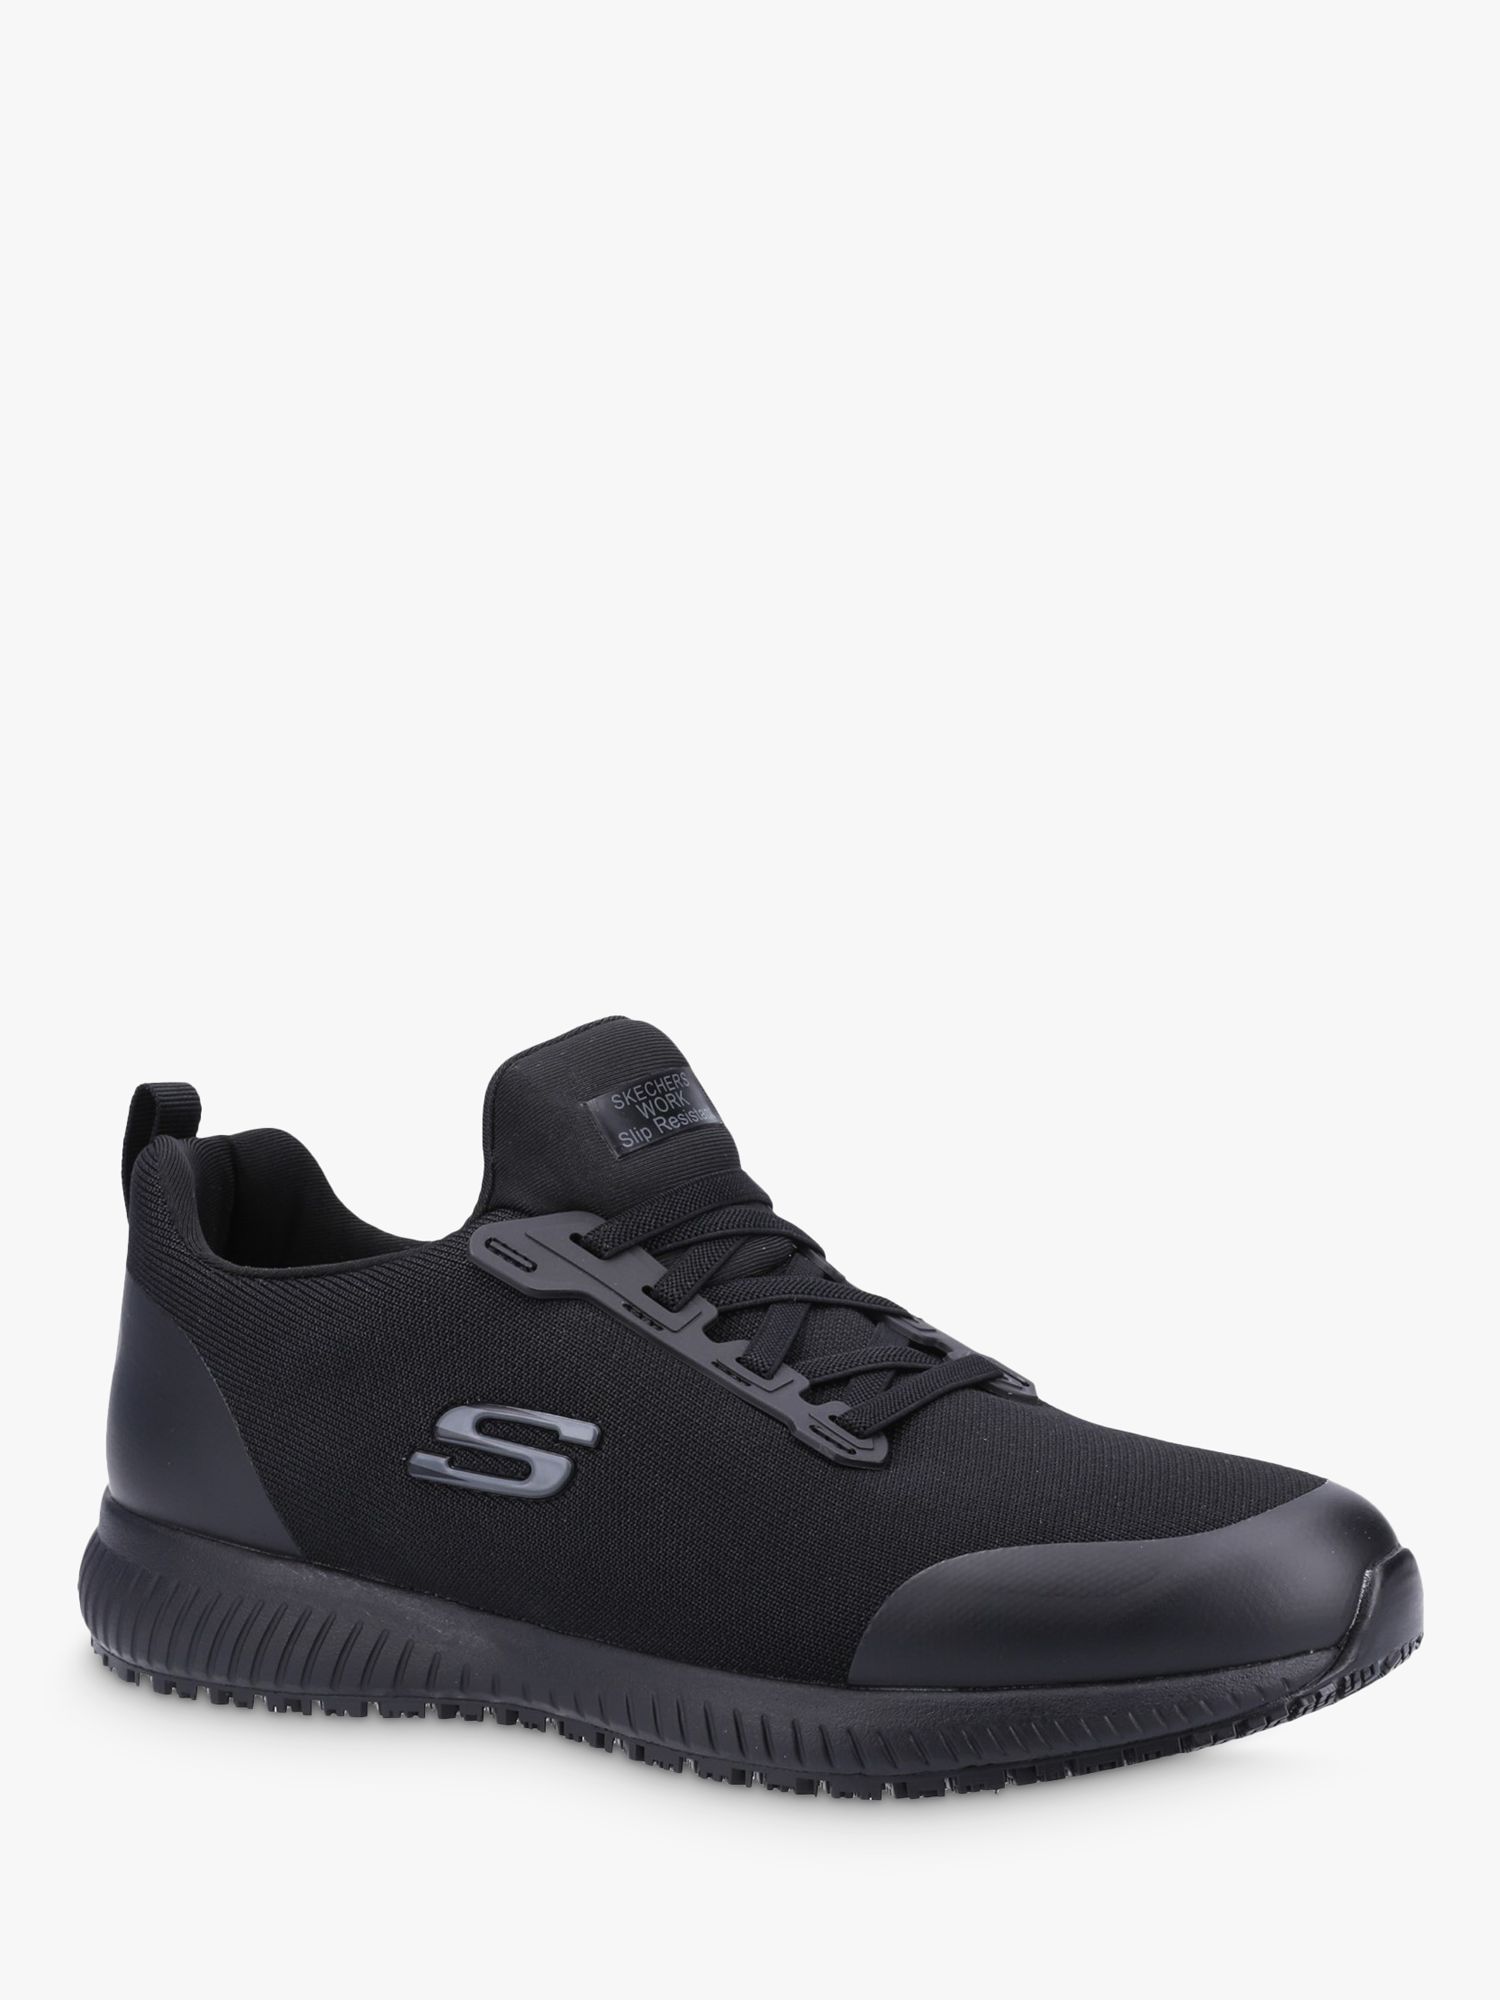 Skechers Squad SR Mytor Trainers at John Lewis & Partners